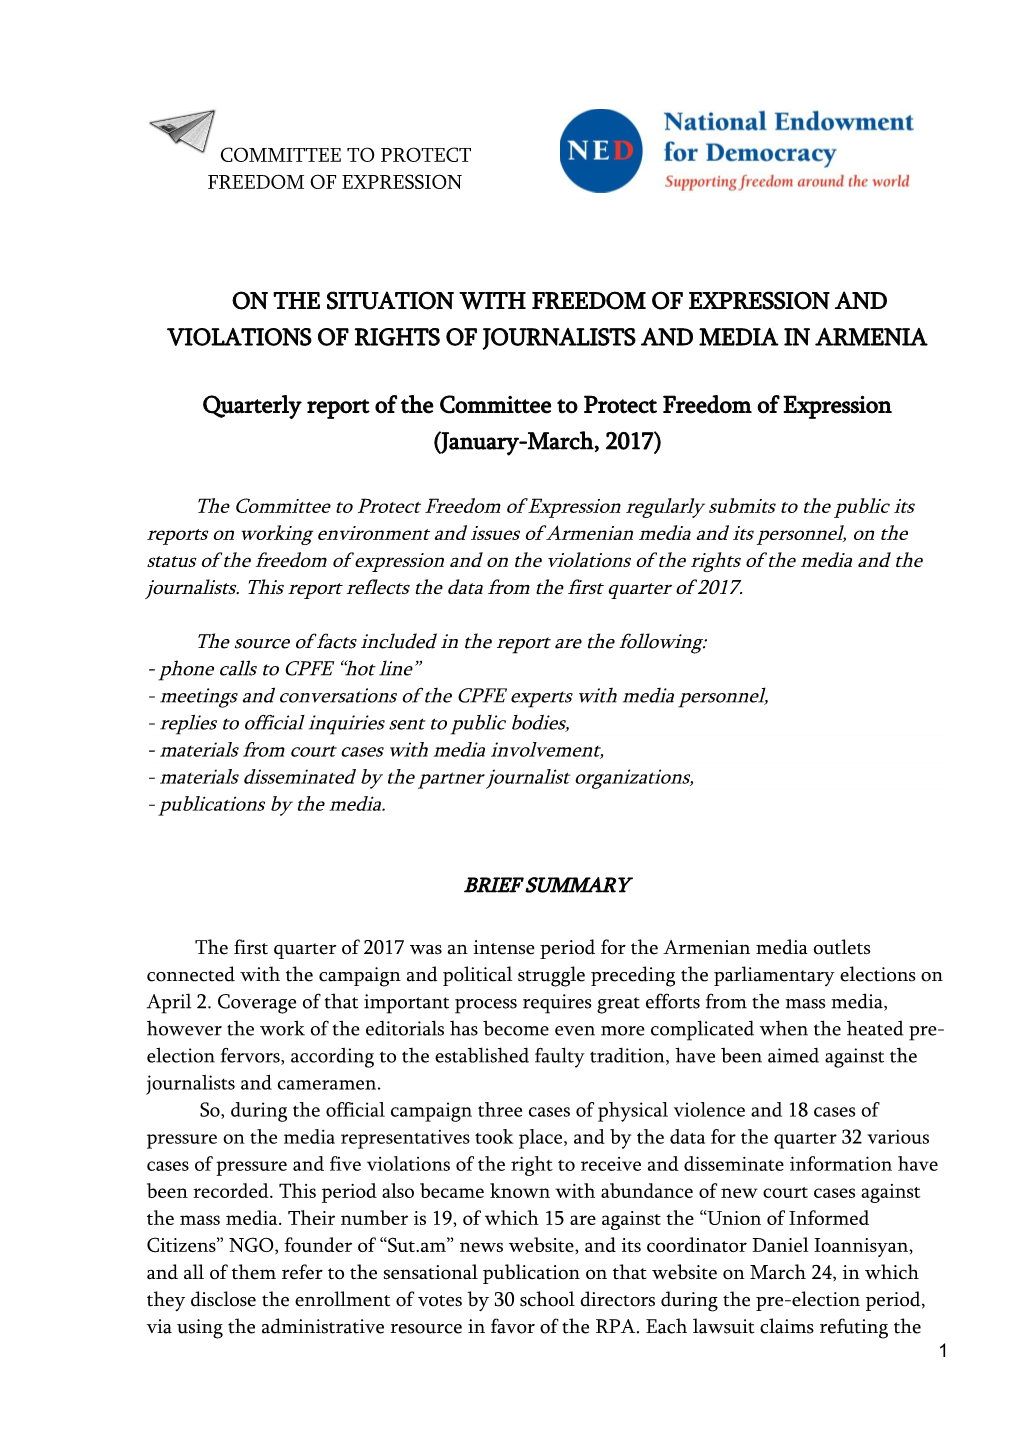 Quarterly Report of the Committee to Protect Freedom of Expression